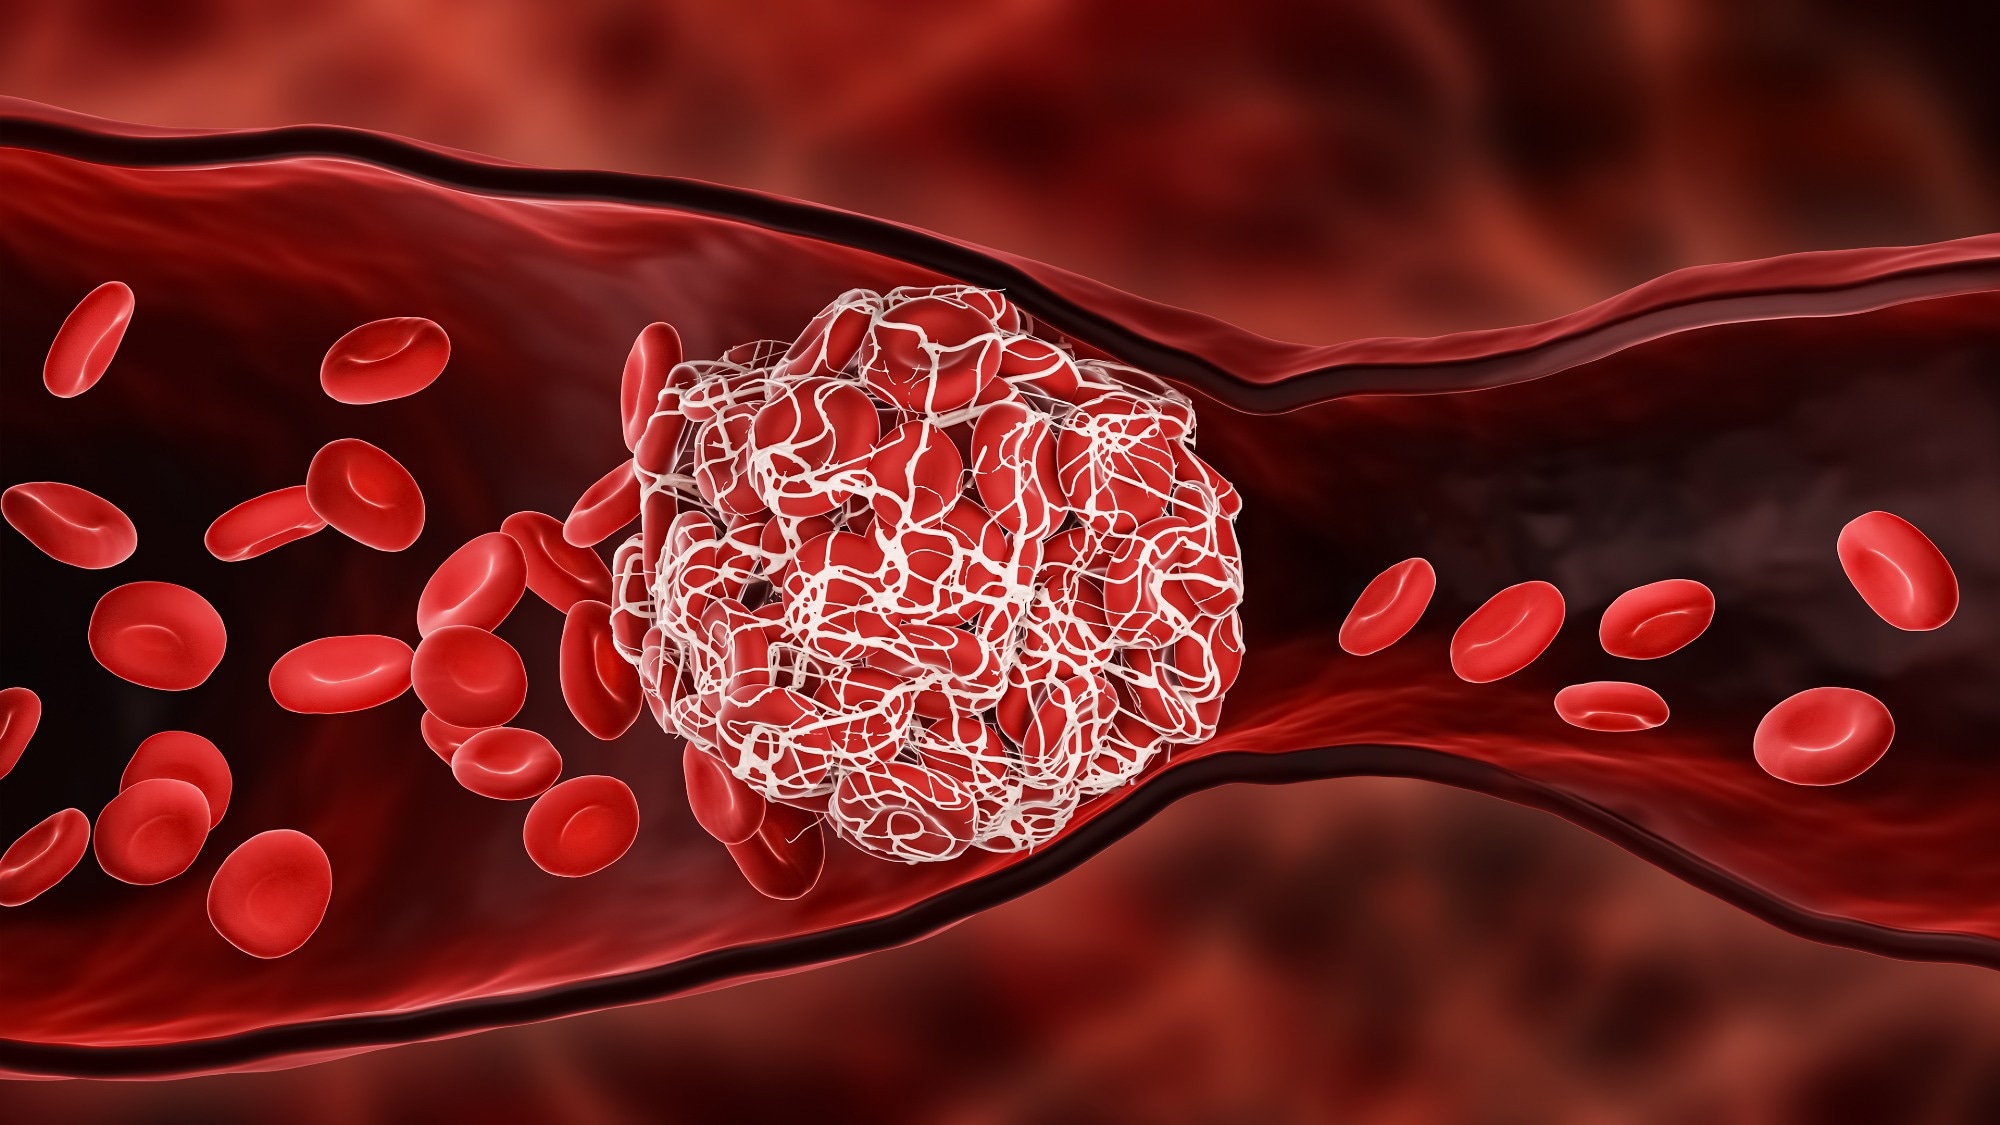 Amplified venous thromboembolism risk due to COVID-19 in patients with malignant tumors